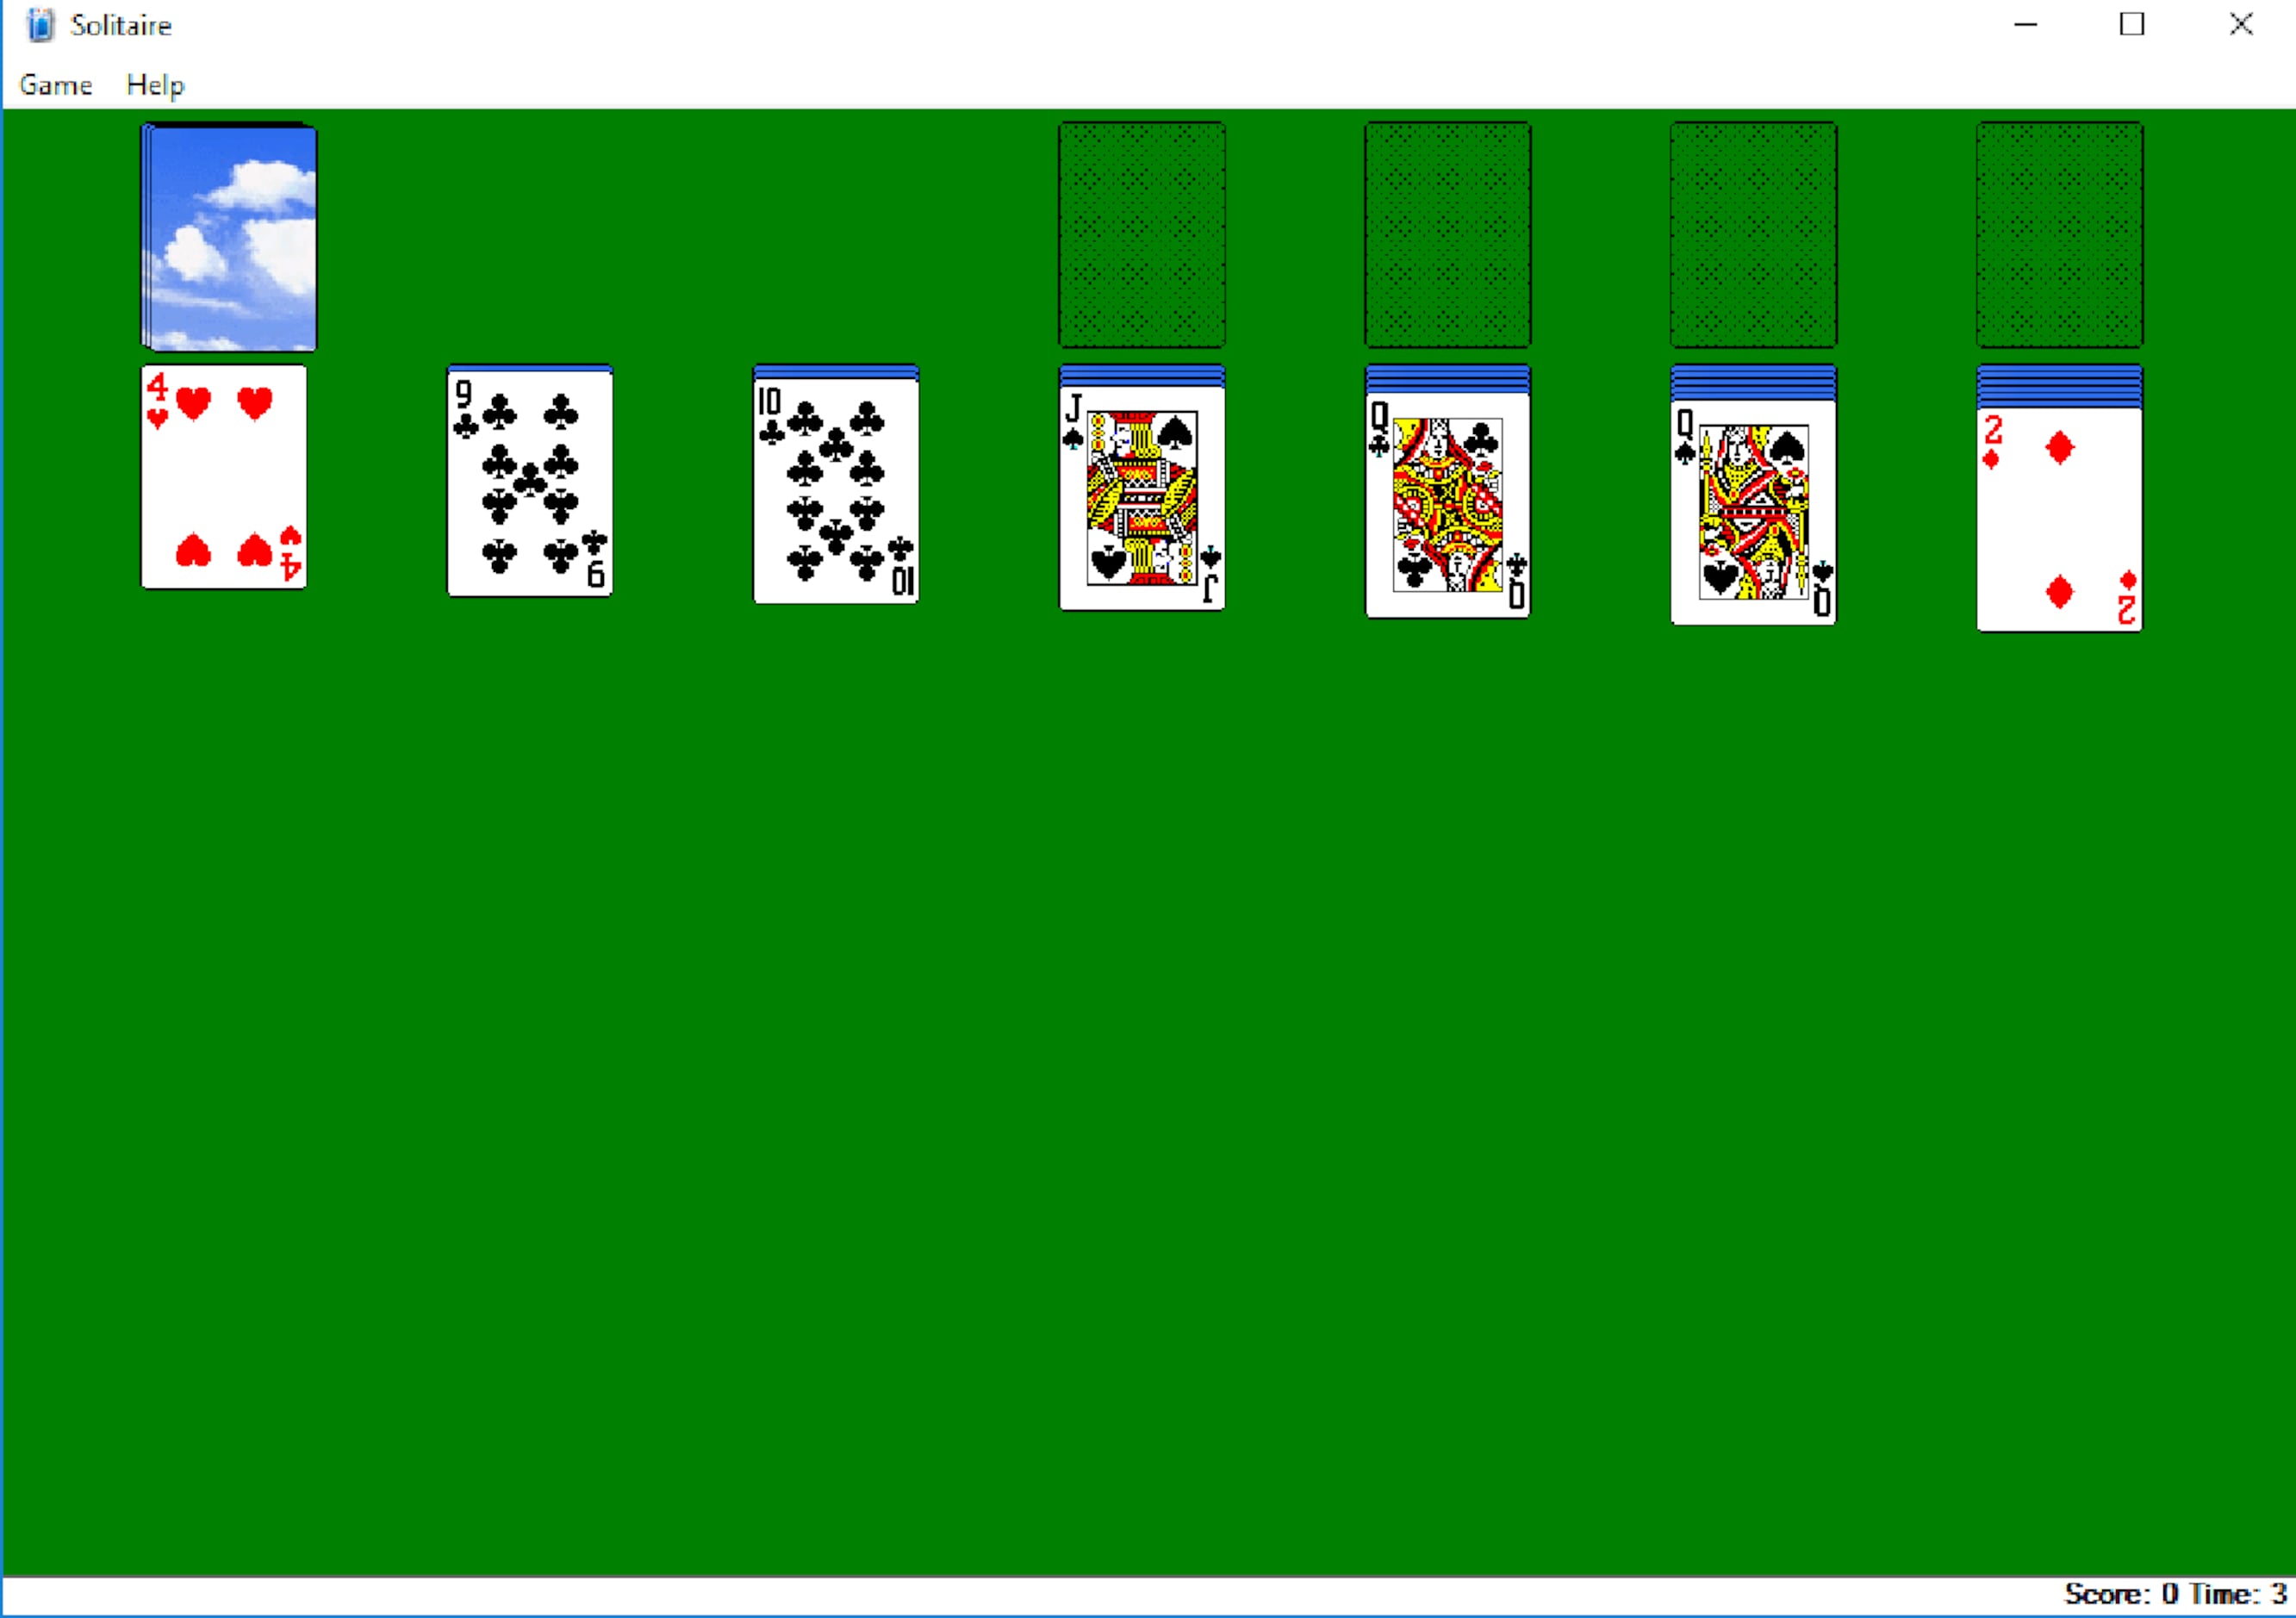 How To - How To Get Classic Solitaire In Windows 10  AnandTech Forums:  Technology, Hardware, Software, and Deals